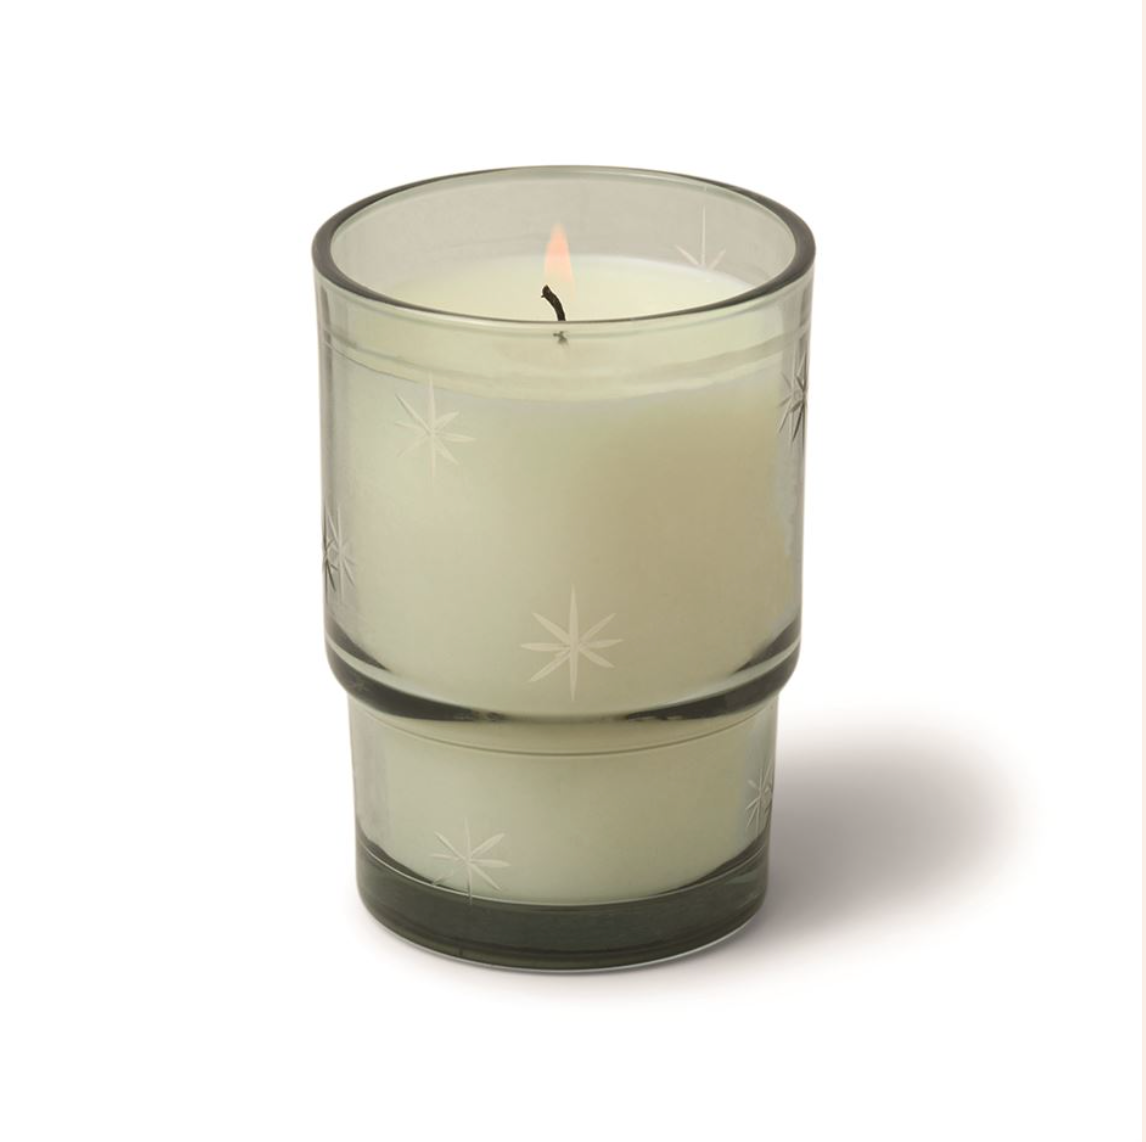 Noel Etched Stars Candle Balsam & Fir